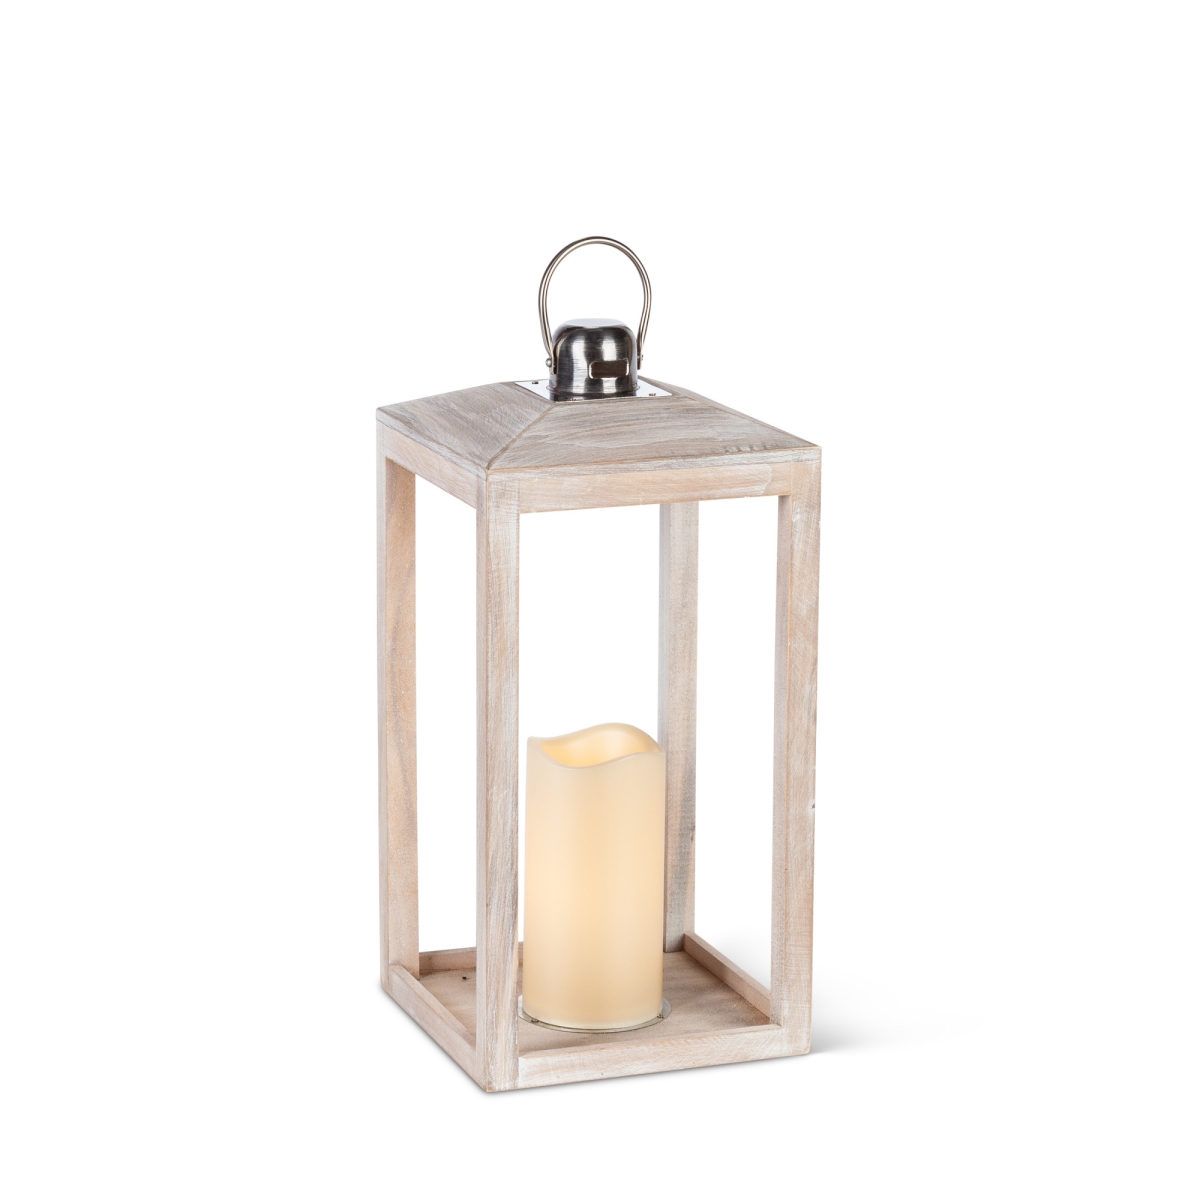 Gerson 44619ec 15 In. Faded-white Antique Wood Lantern With No Panes, Warm White Led Candle & Timer - Set Of 2